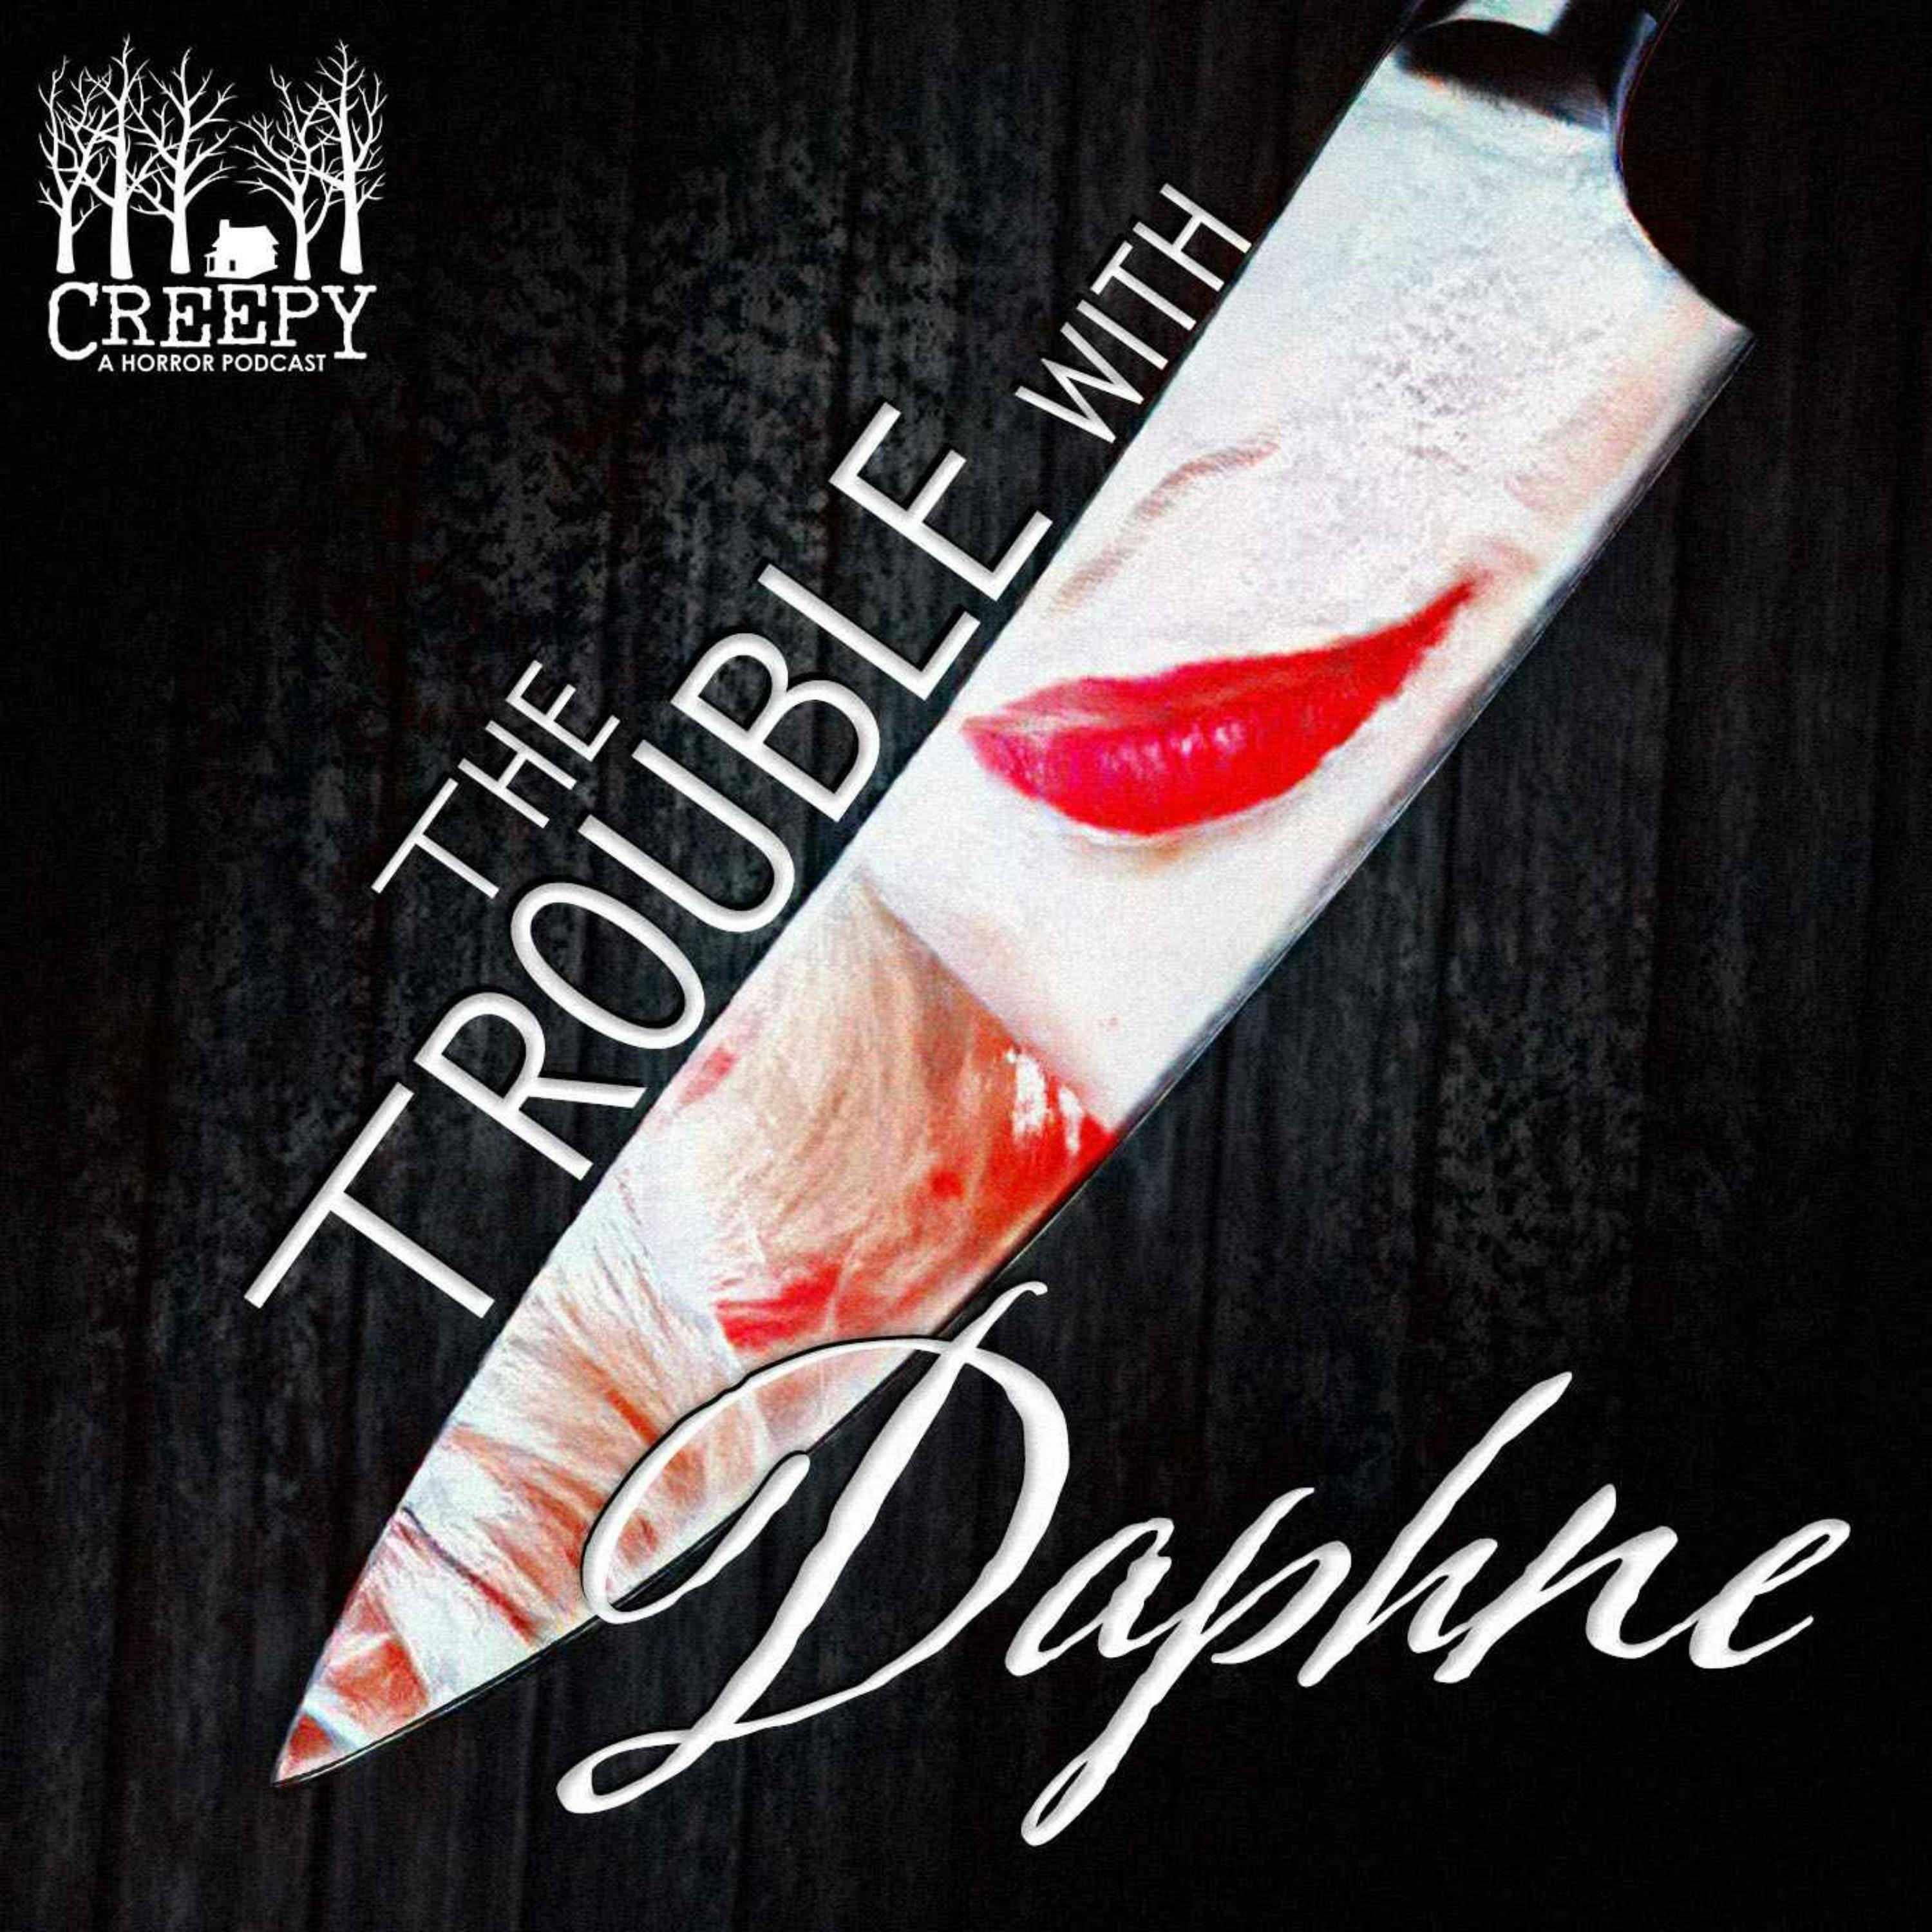 The Trouble with Daphne